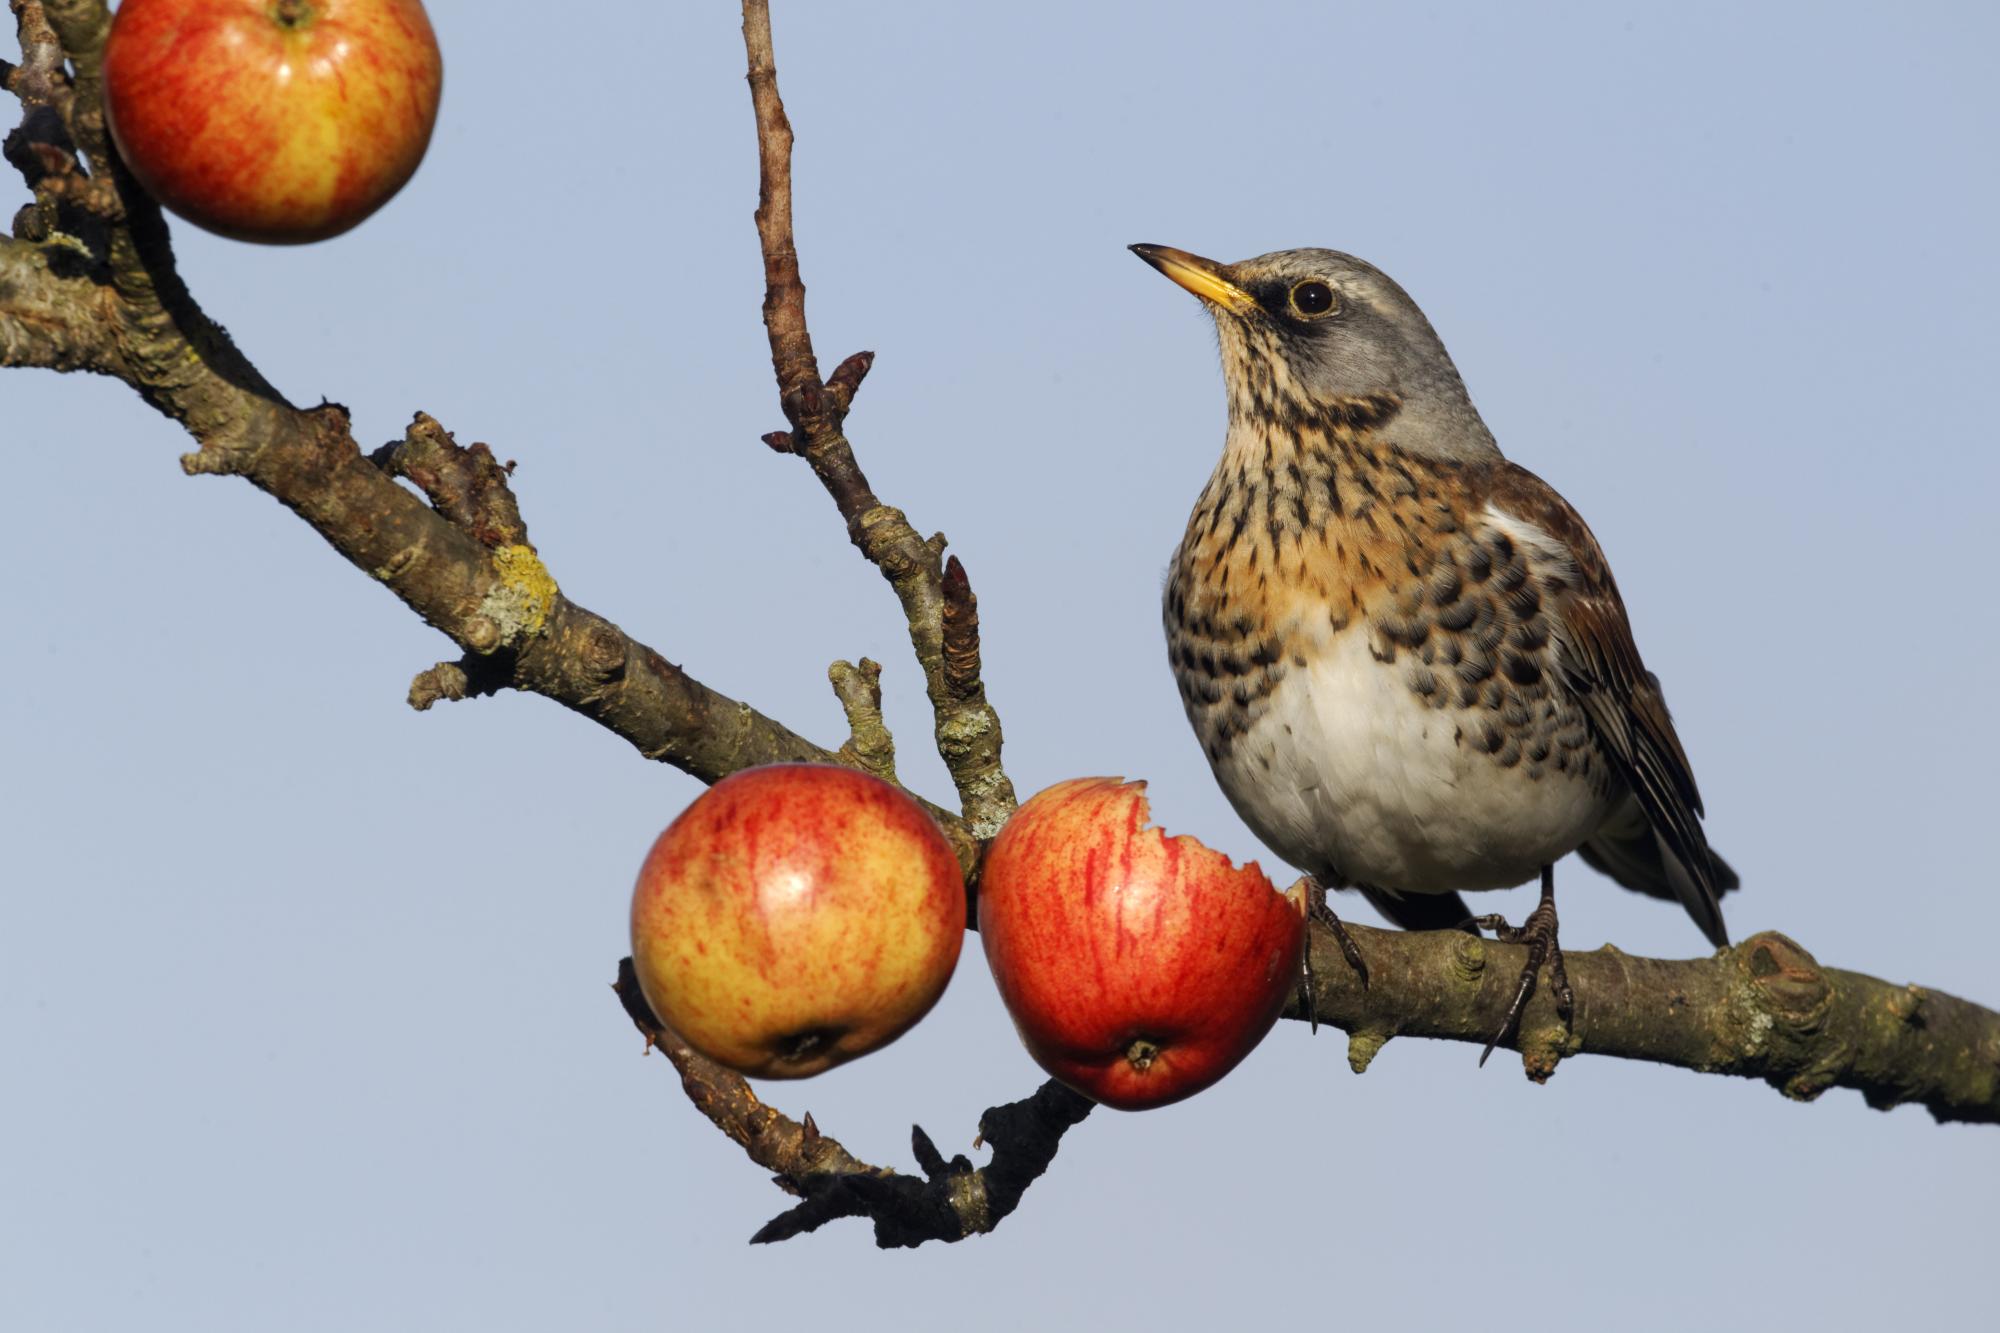 Make space for nature campaign - A fieldfare eating an apple spiked on a branch